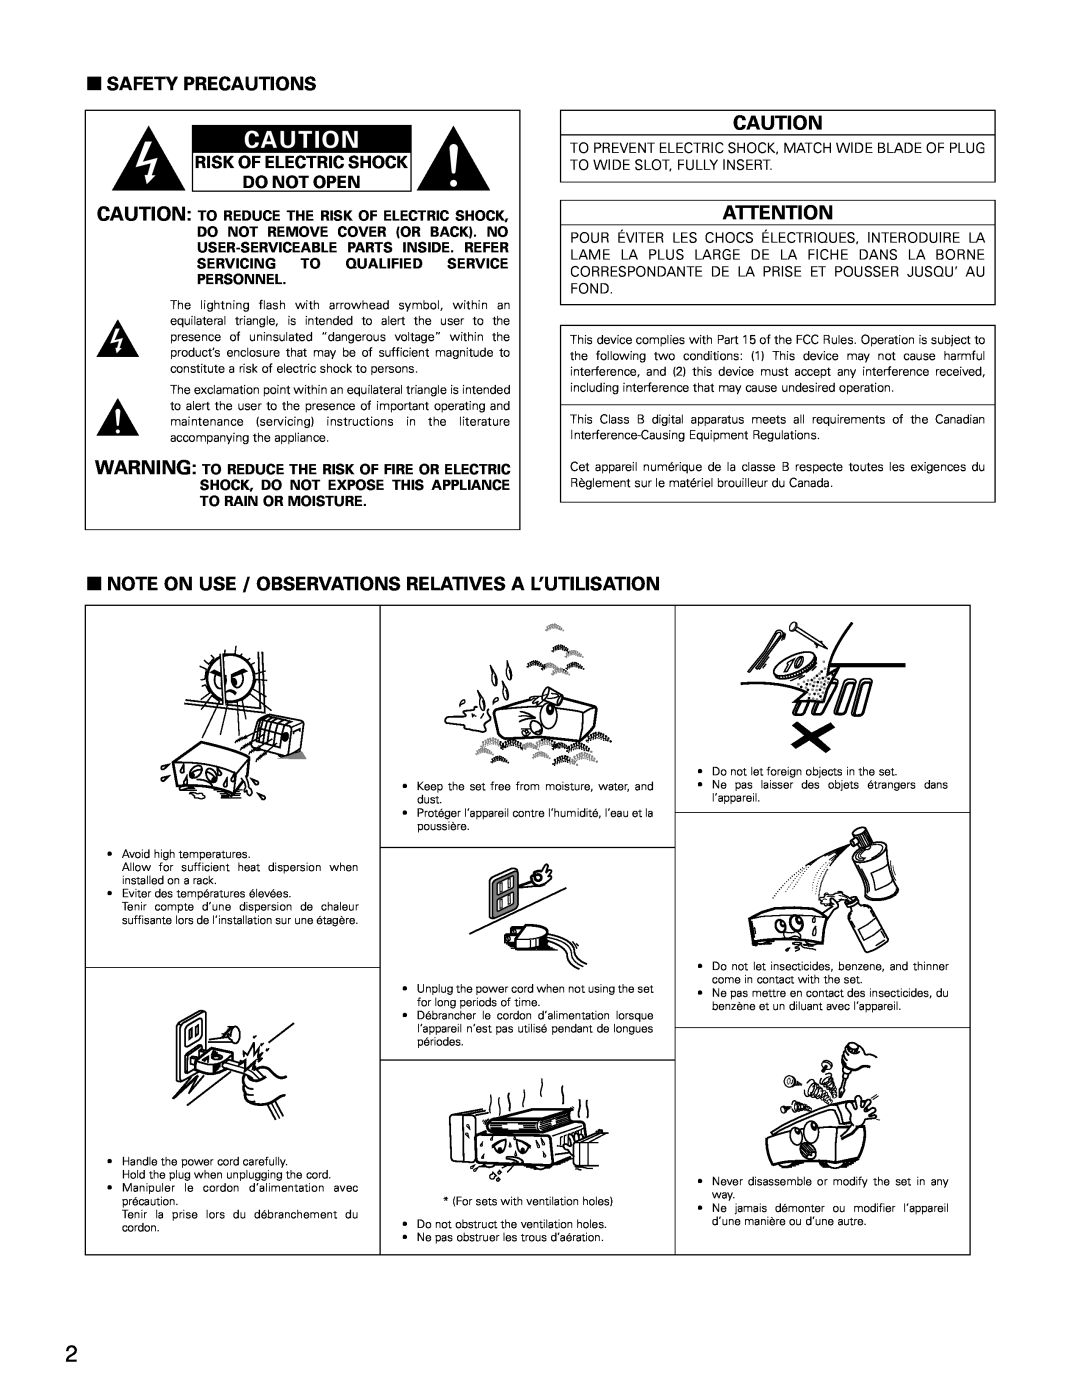 Denon AVR-4802 manual 2SAFETY PRECAUTIONS, Risk Of Electric Shock Do Not Open, Servicing To Qualified Service Personnel 